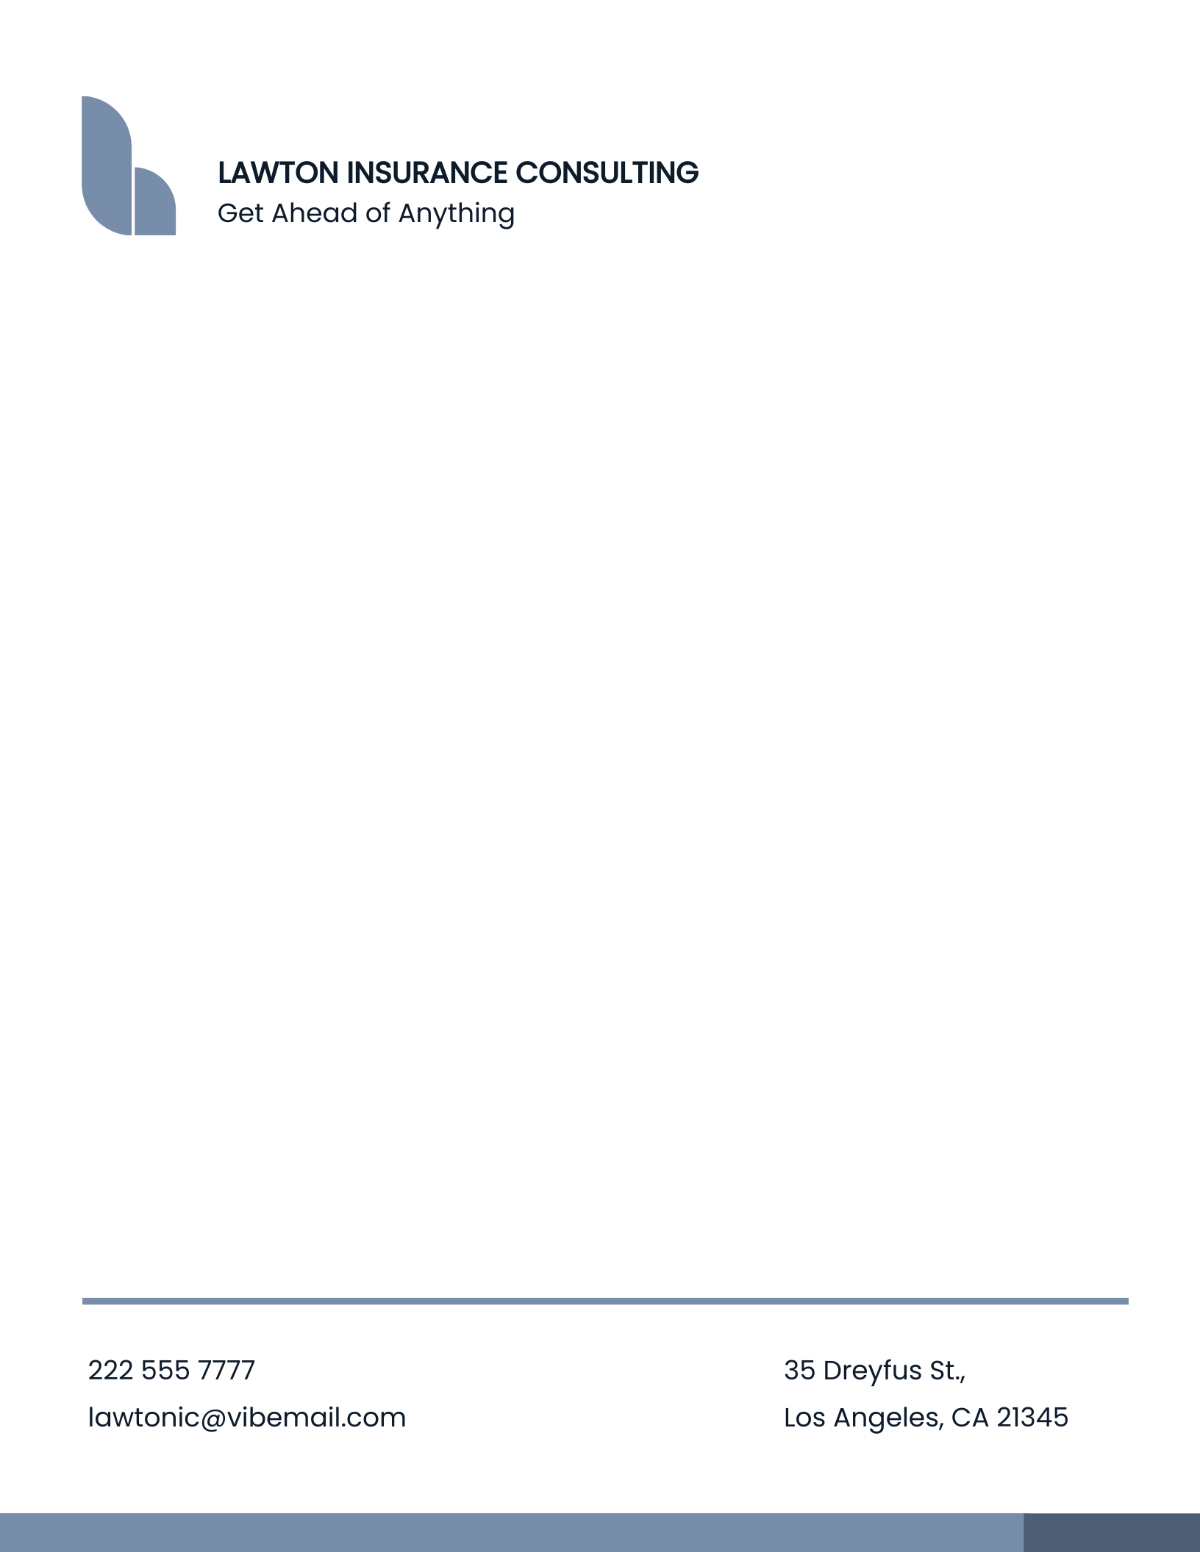 Insurance Consulting Letterhead Template